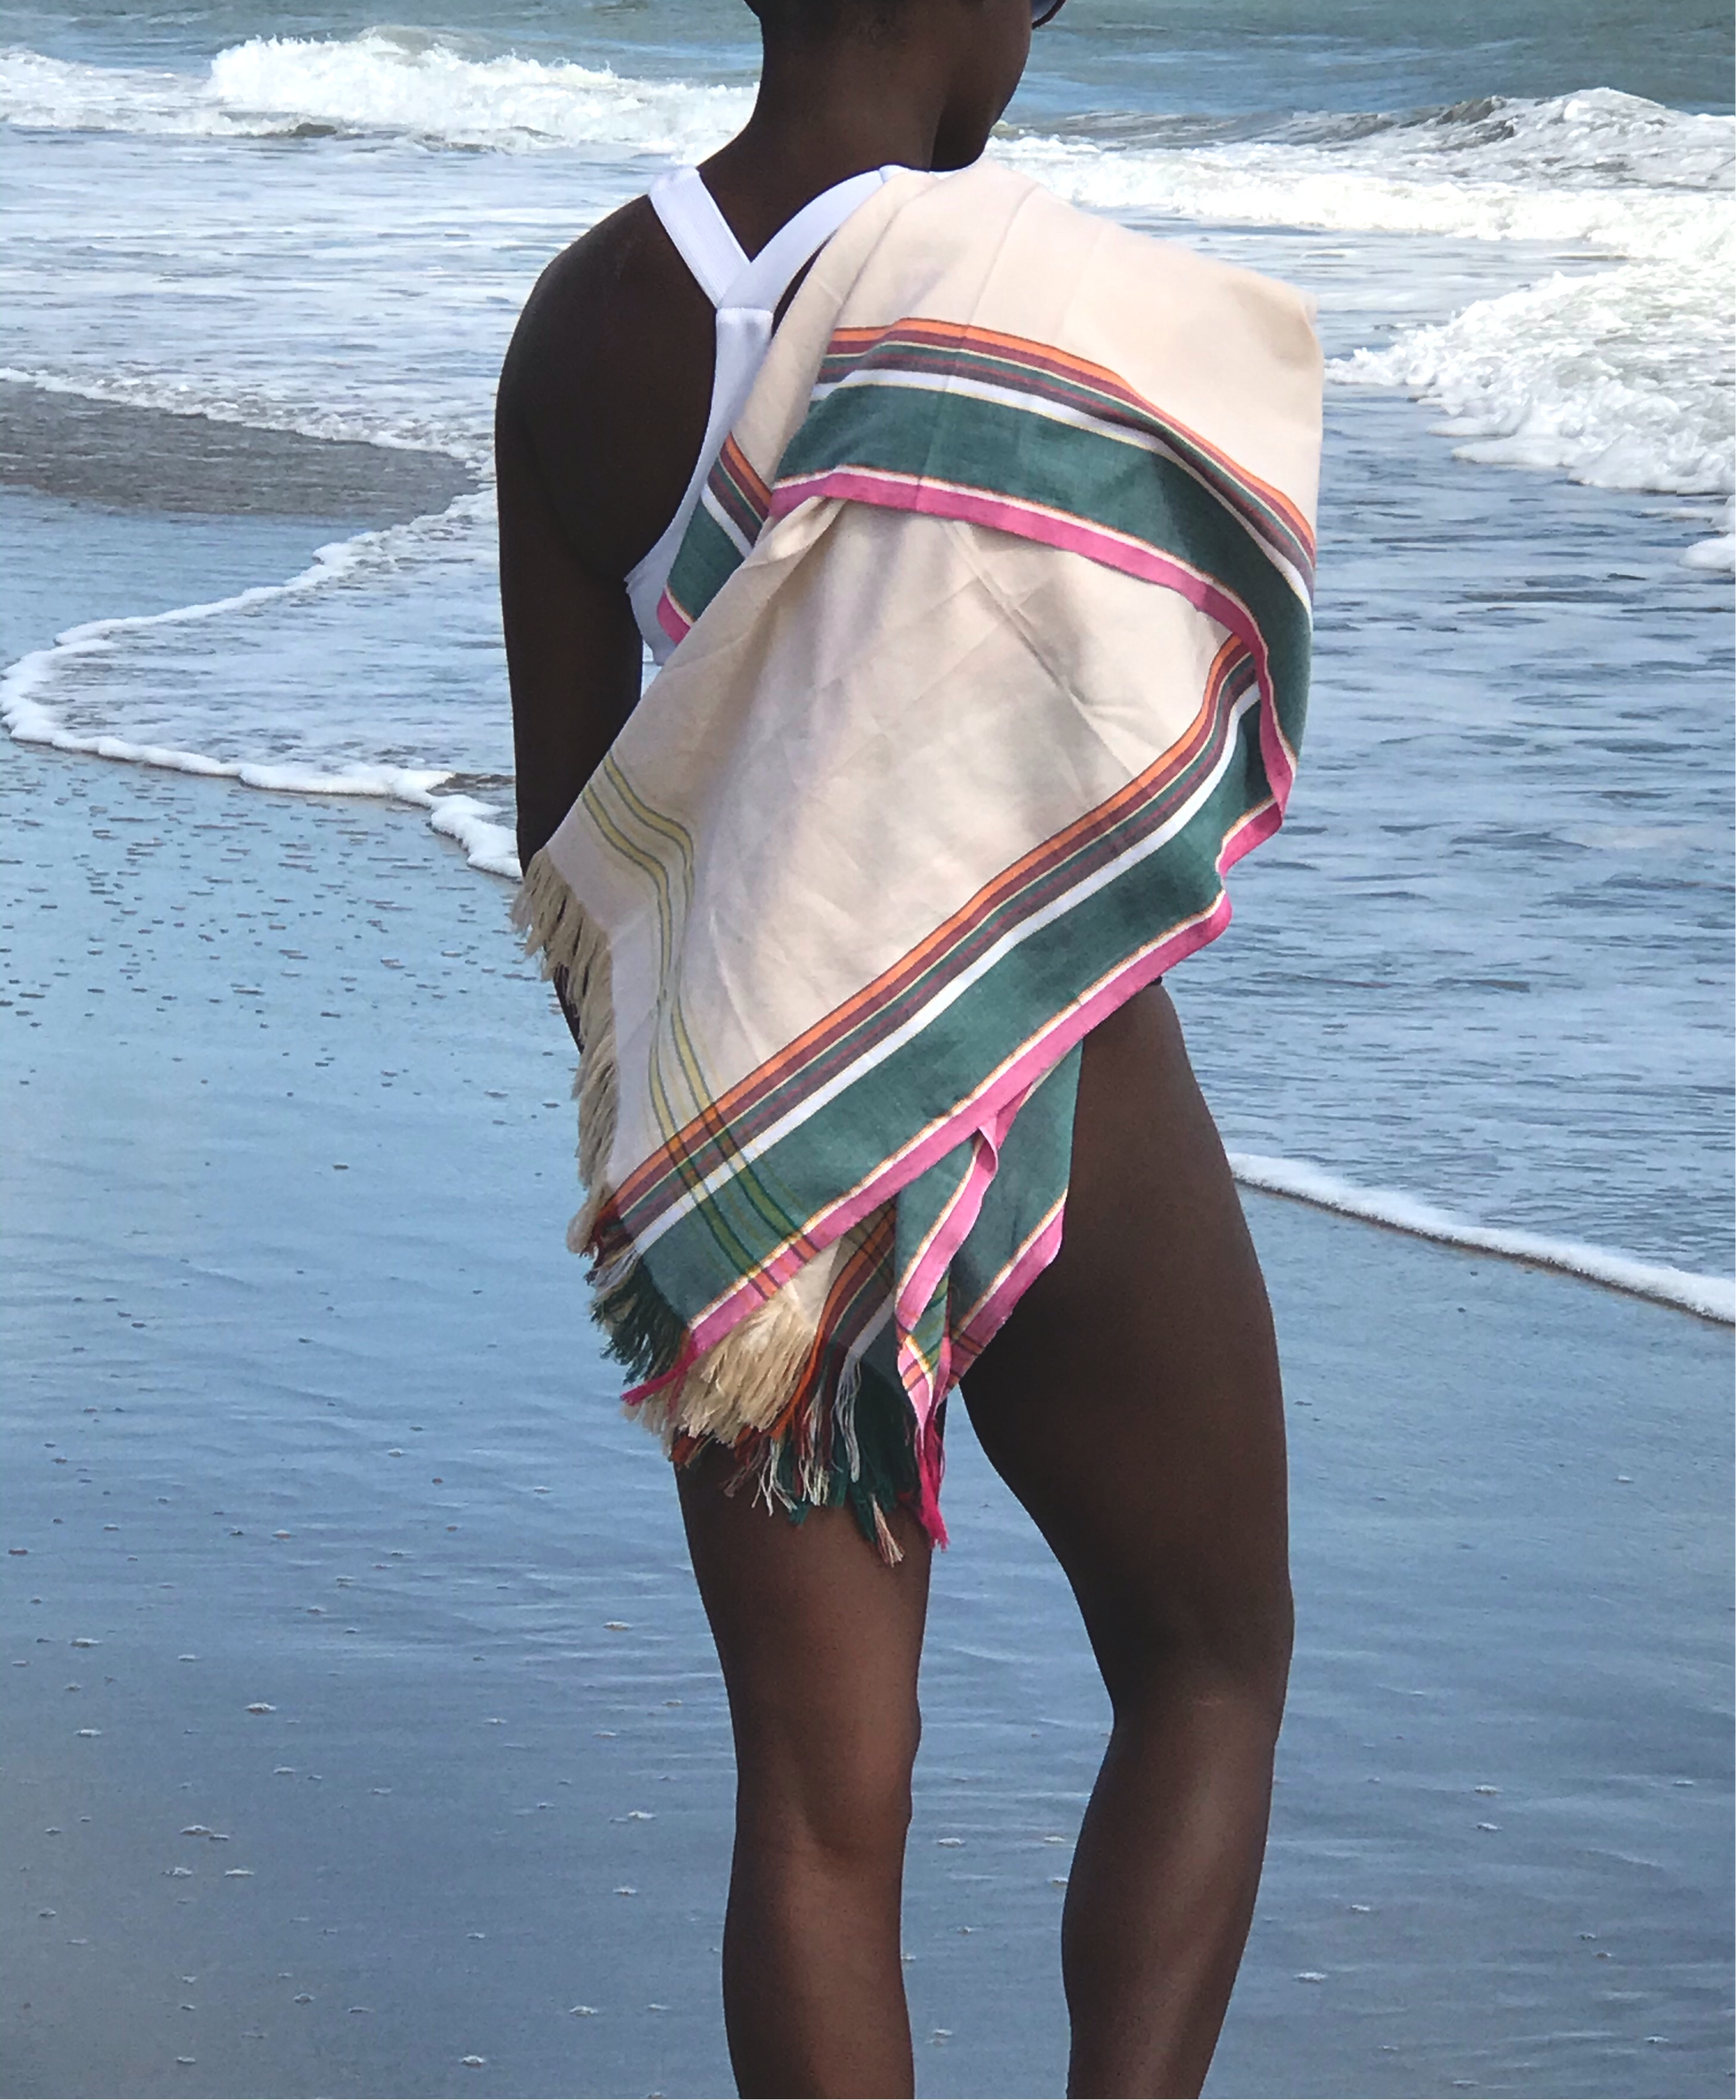 Sarong Beach Wrap cotton African kikoy/ beach cover up / swimssuit coverup - The Lotus Wave 